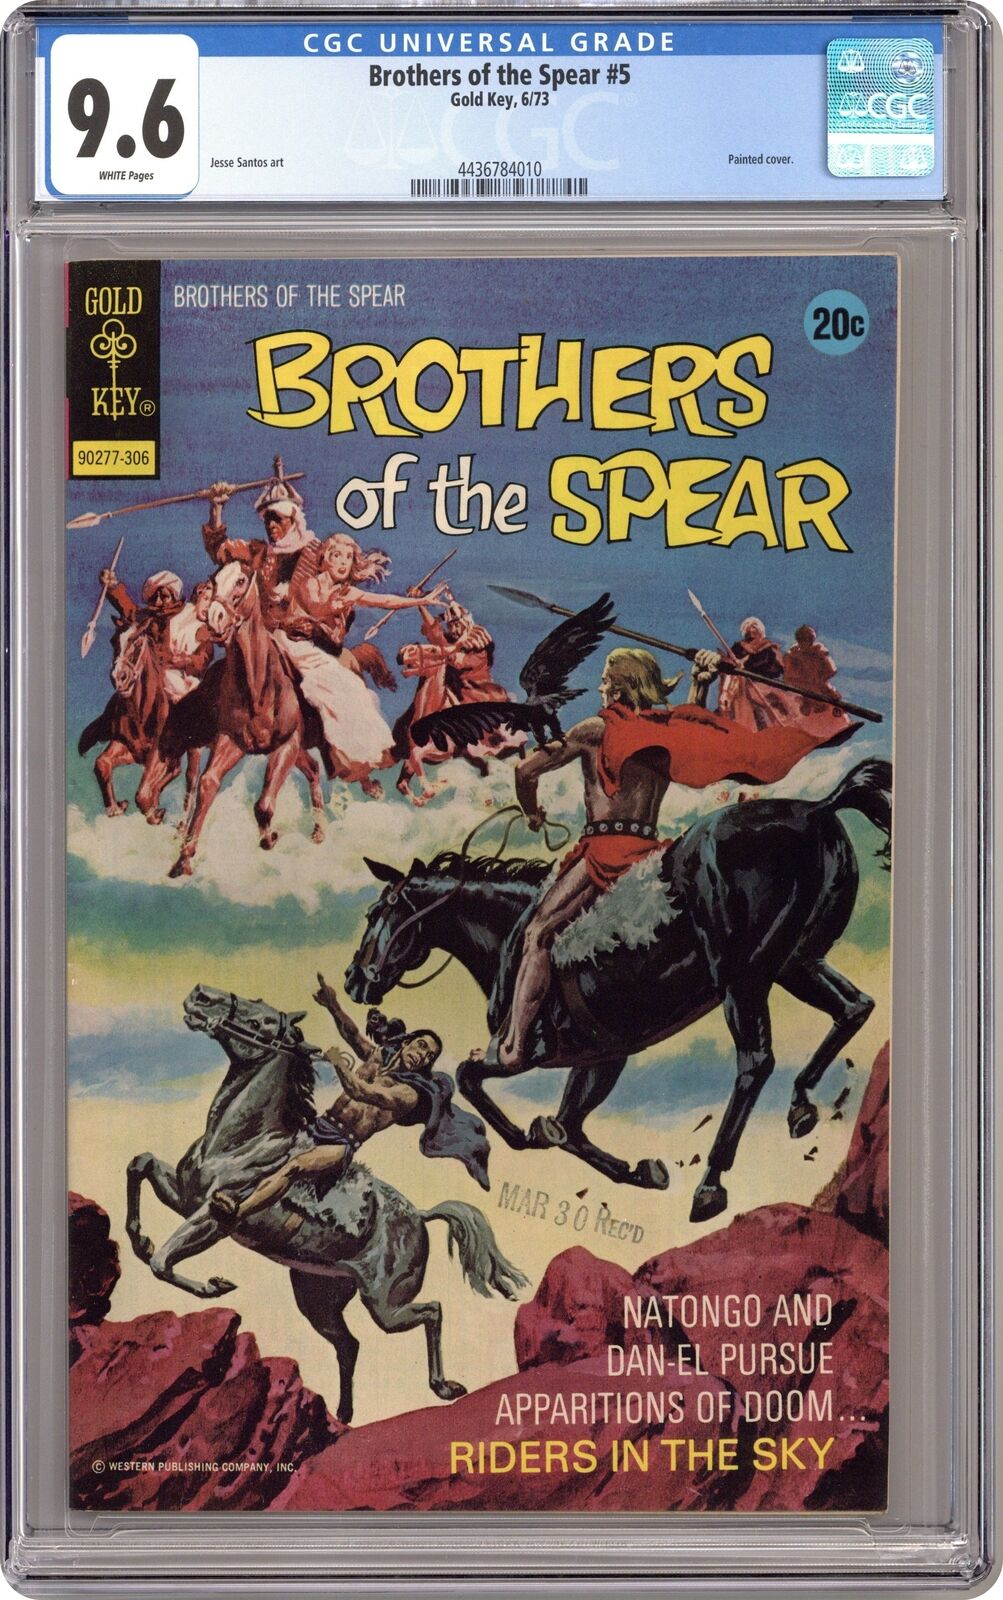 Brothers of the Spear #5 CGC 9.6 1973 Gold Key 4436784010